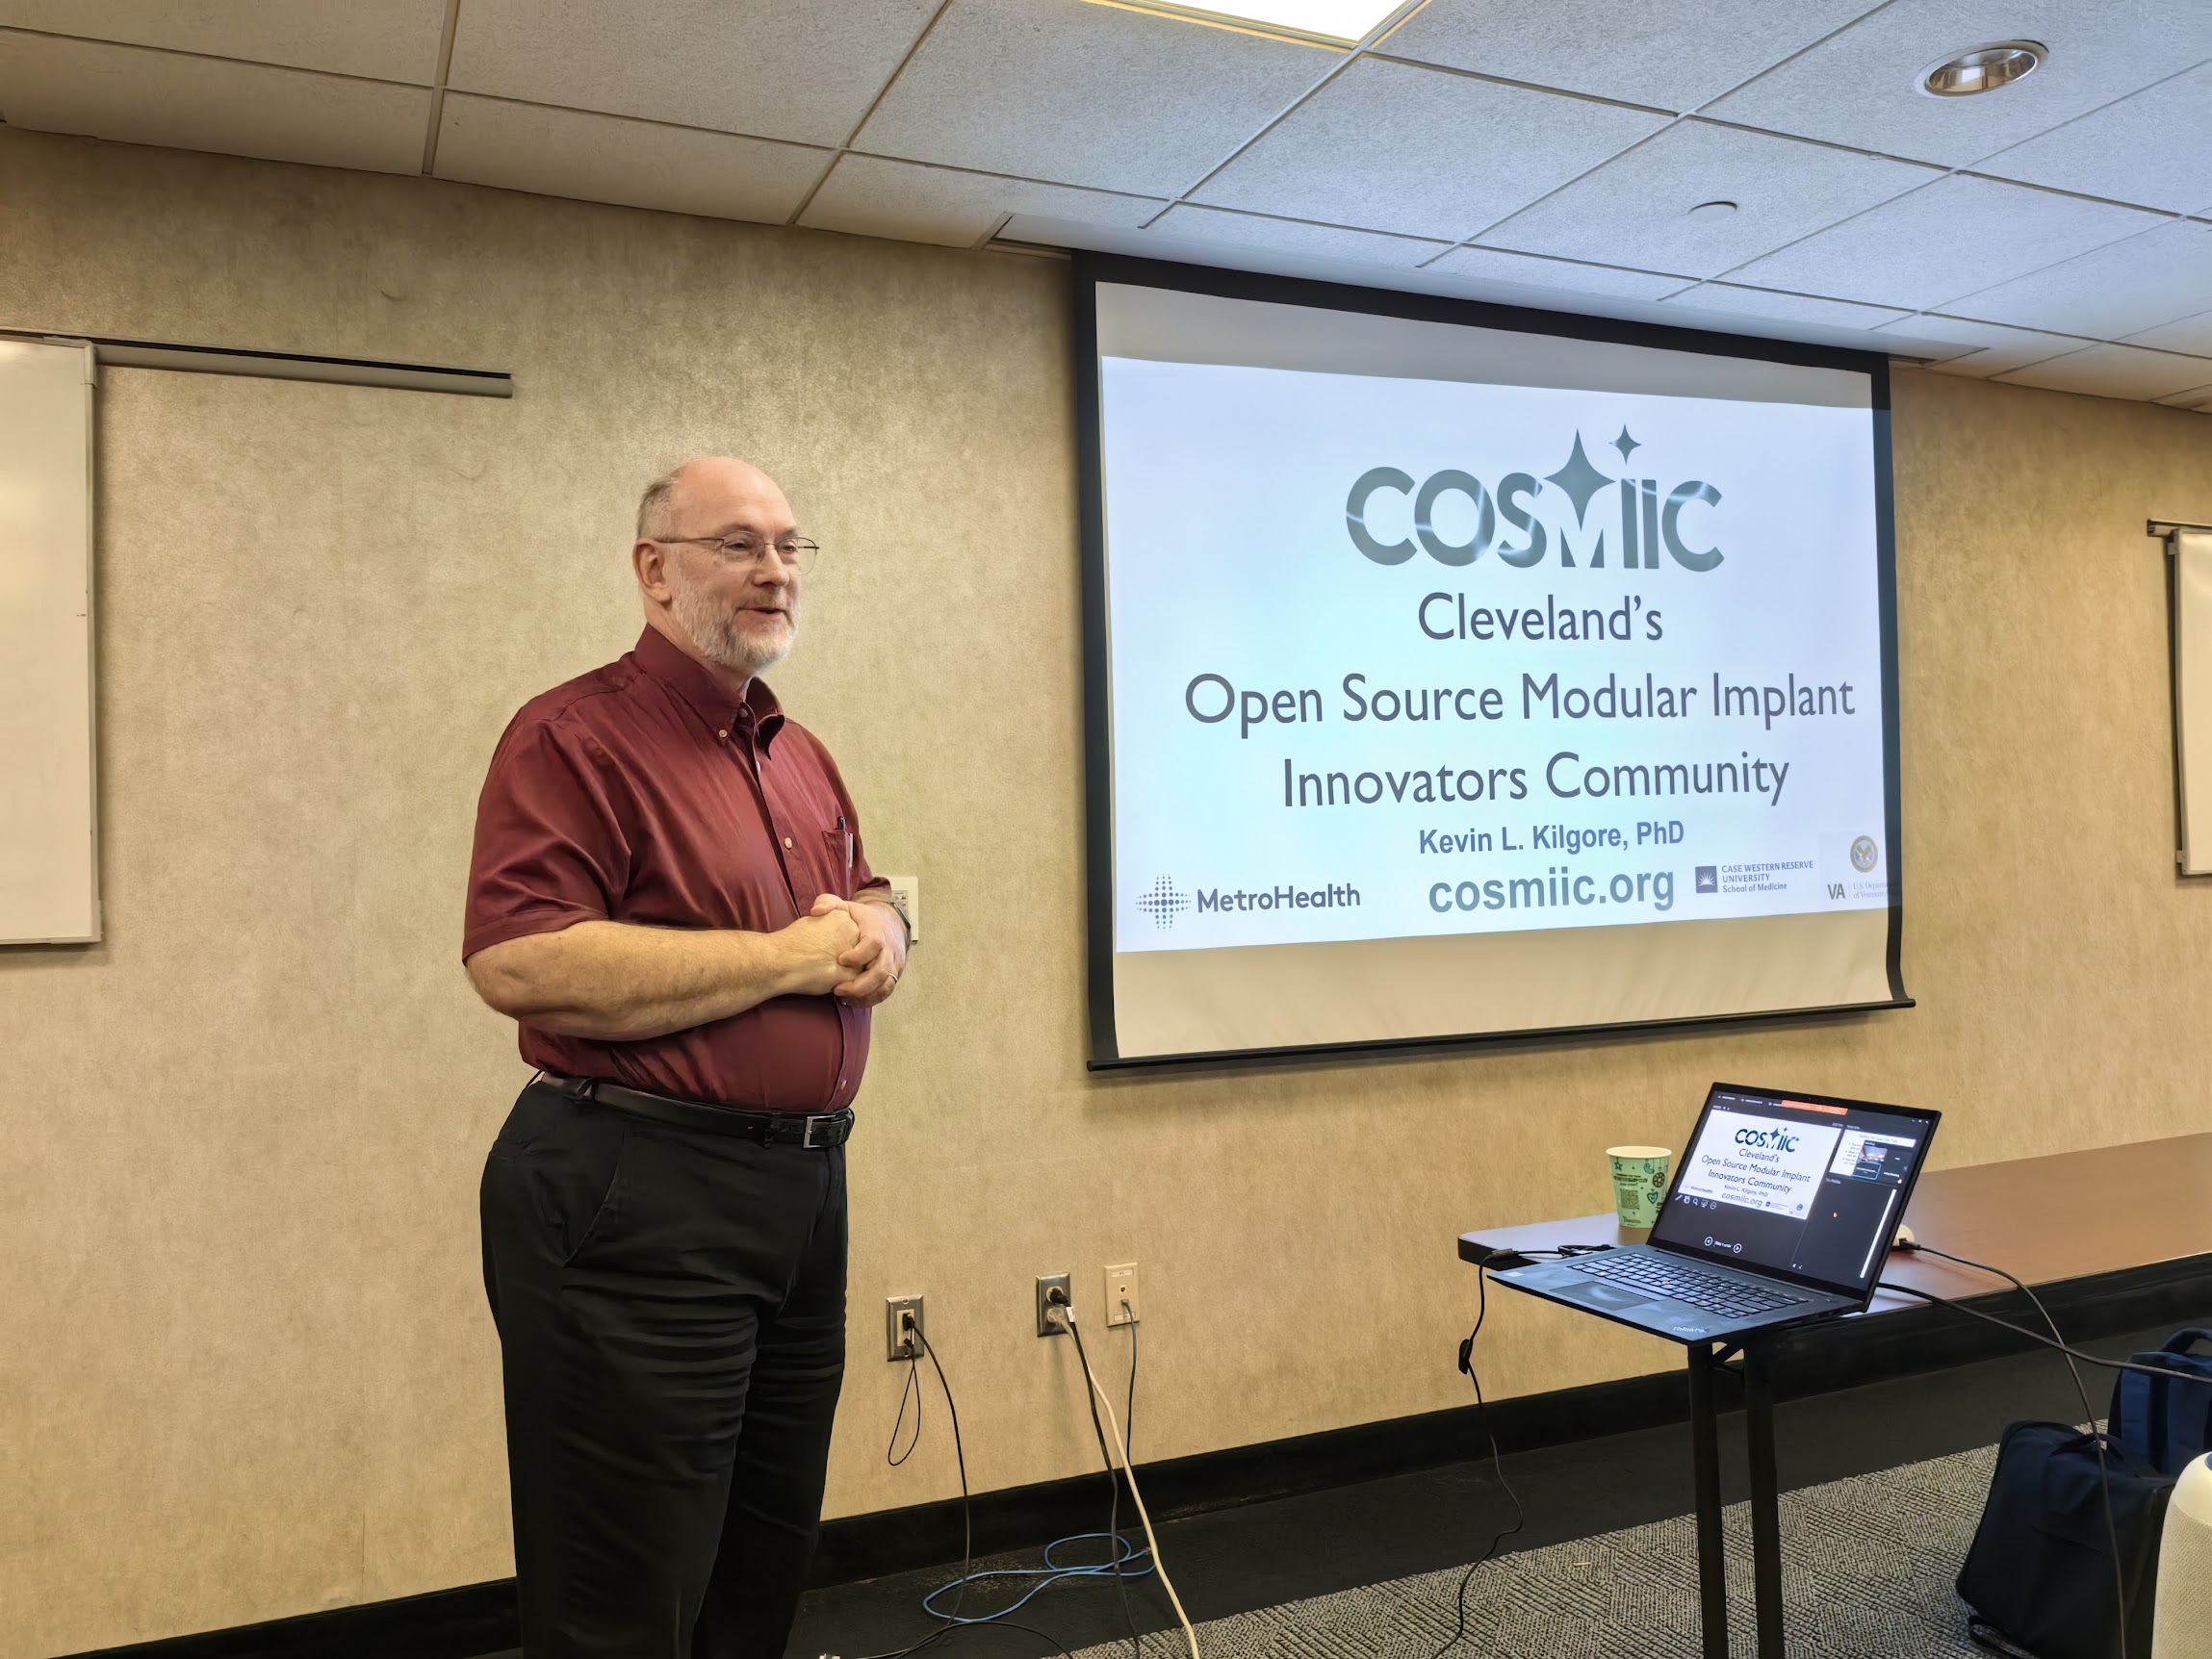 Talk about the Cleveland Open Source Modular Implant Innovators Community (COSMIIC)